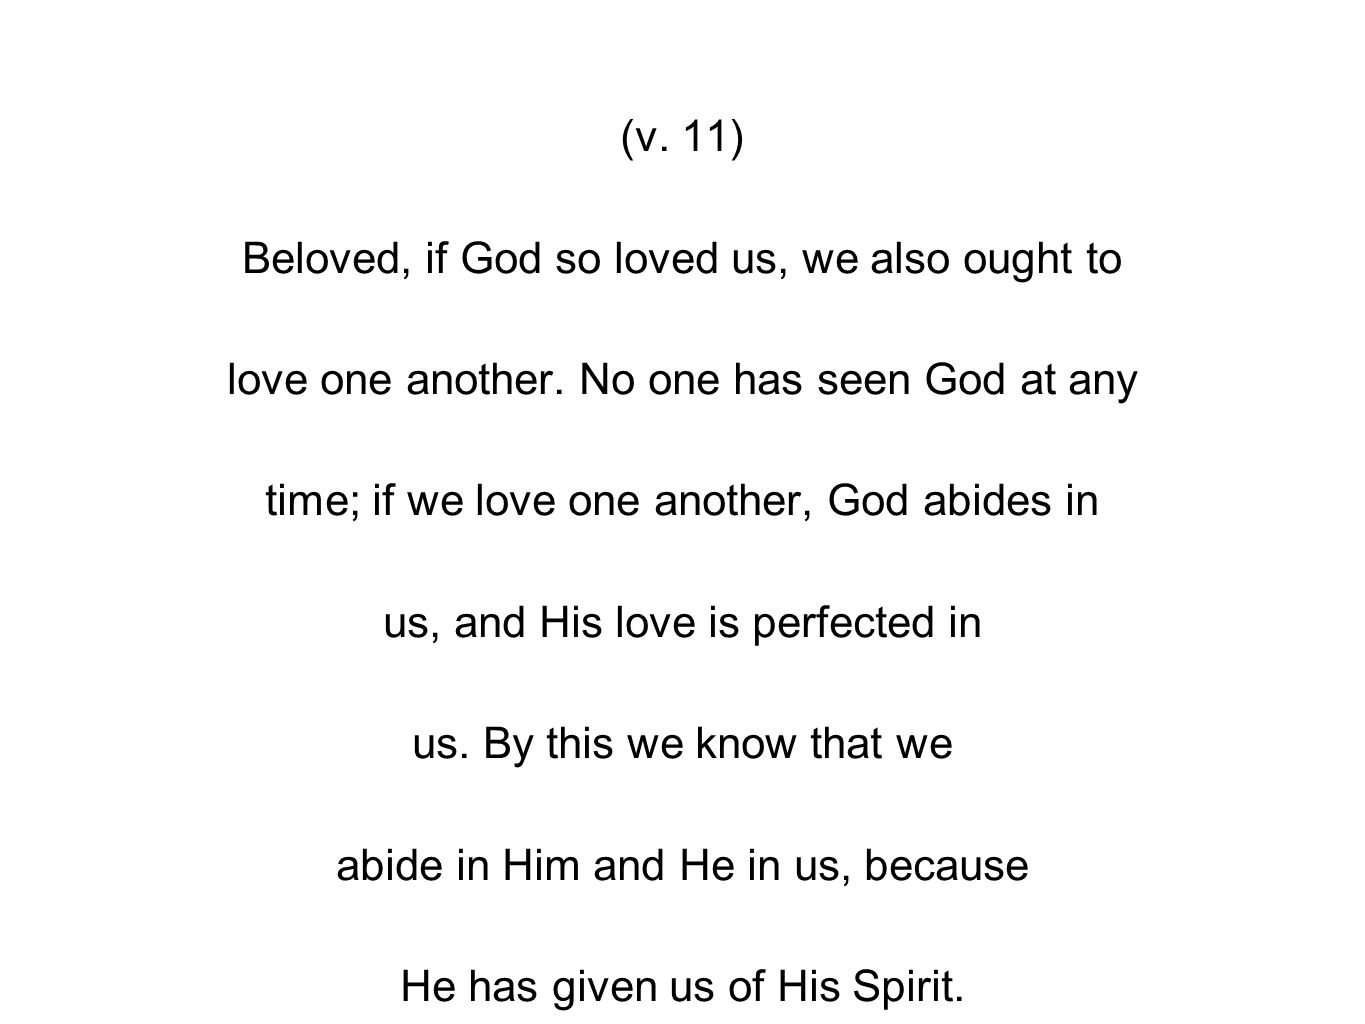 (v. 11) Beloved, if God so loved us, we also ought to love one another.